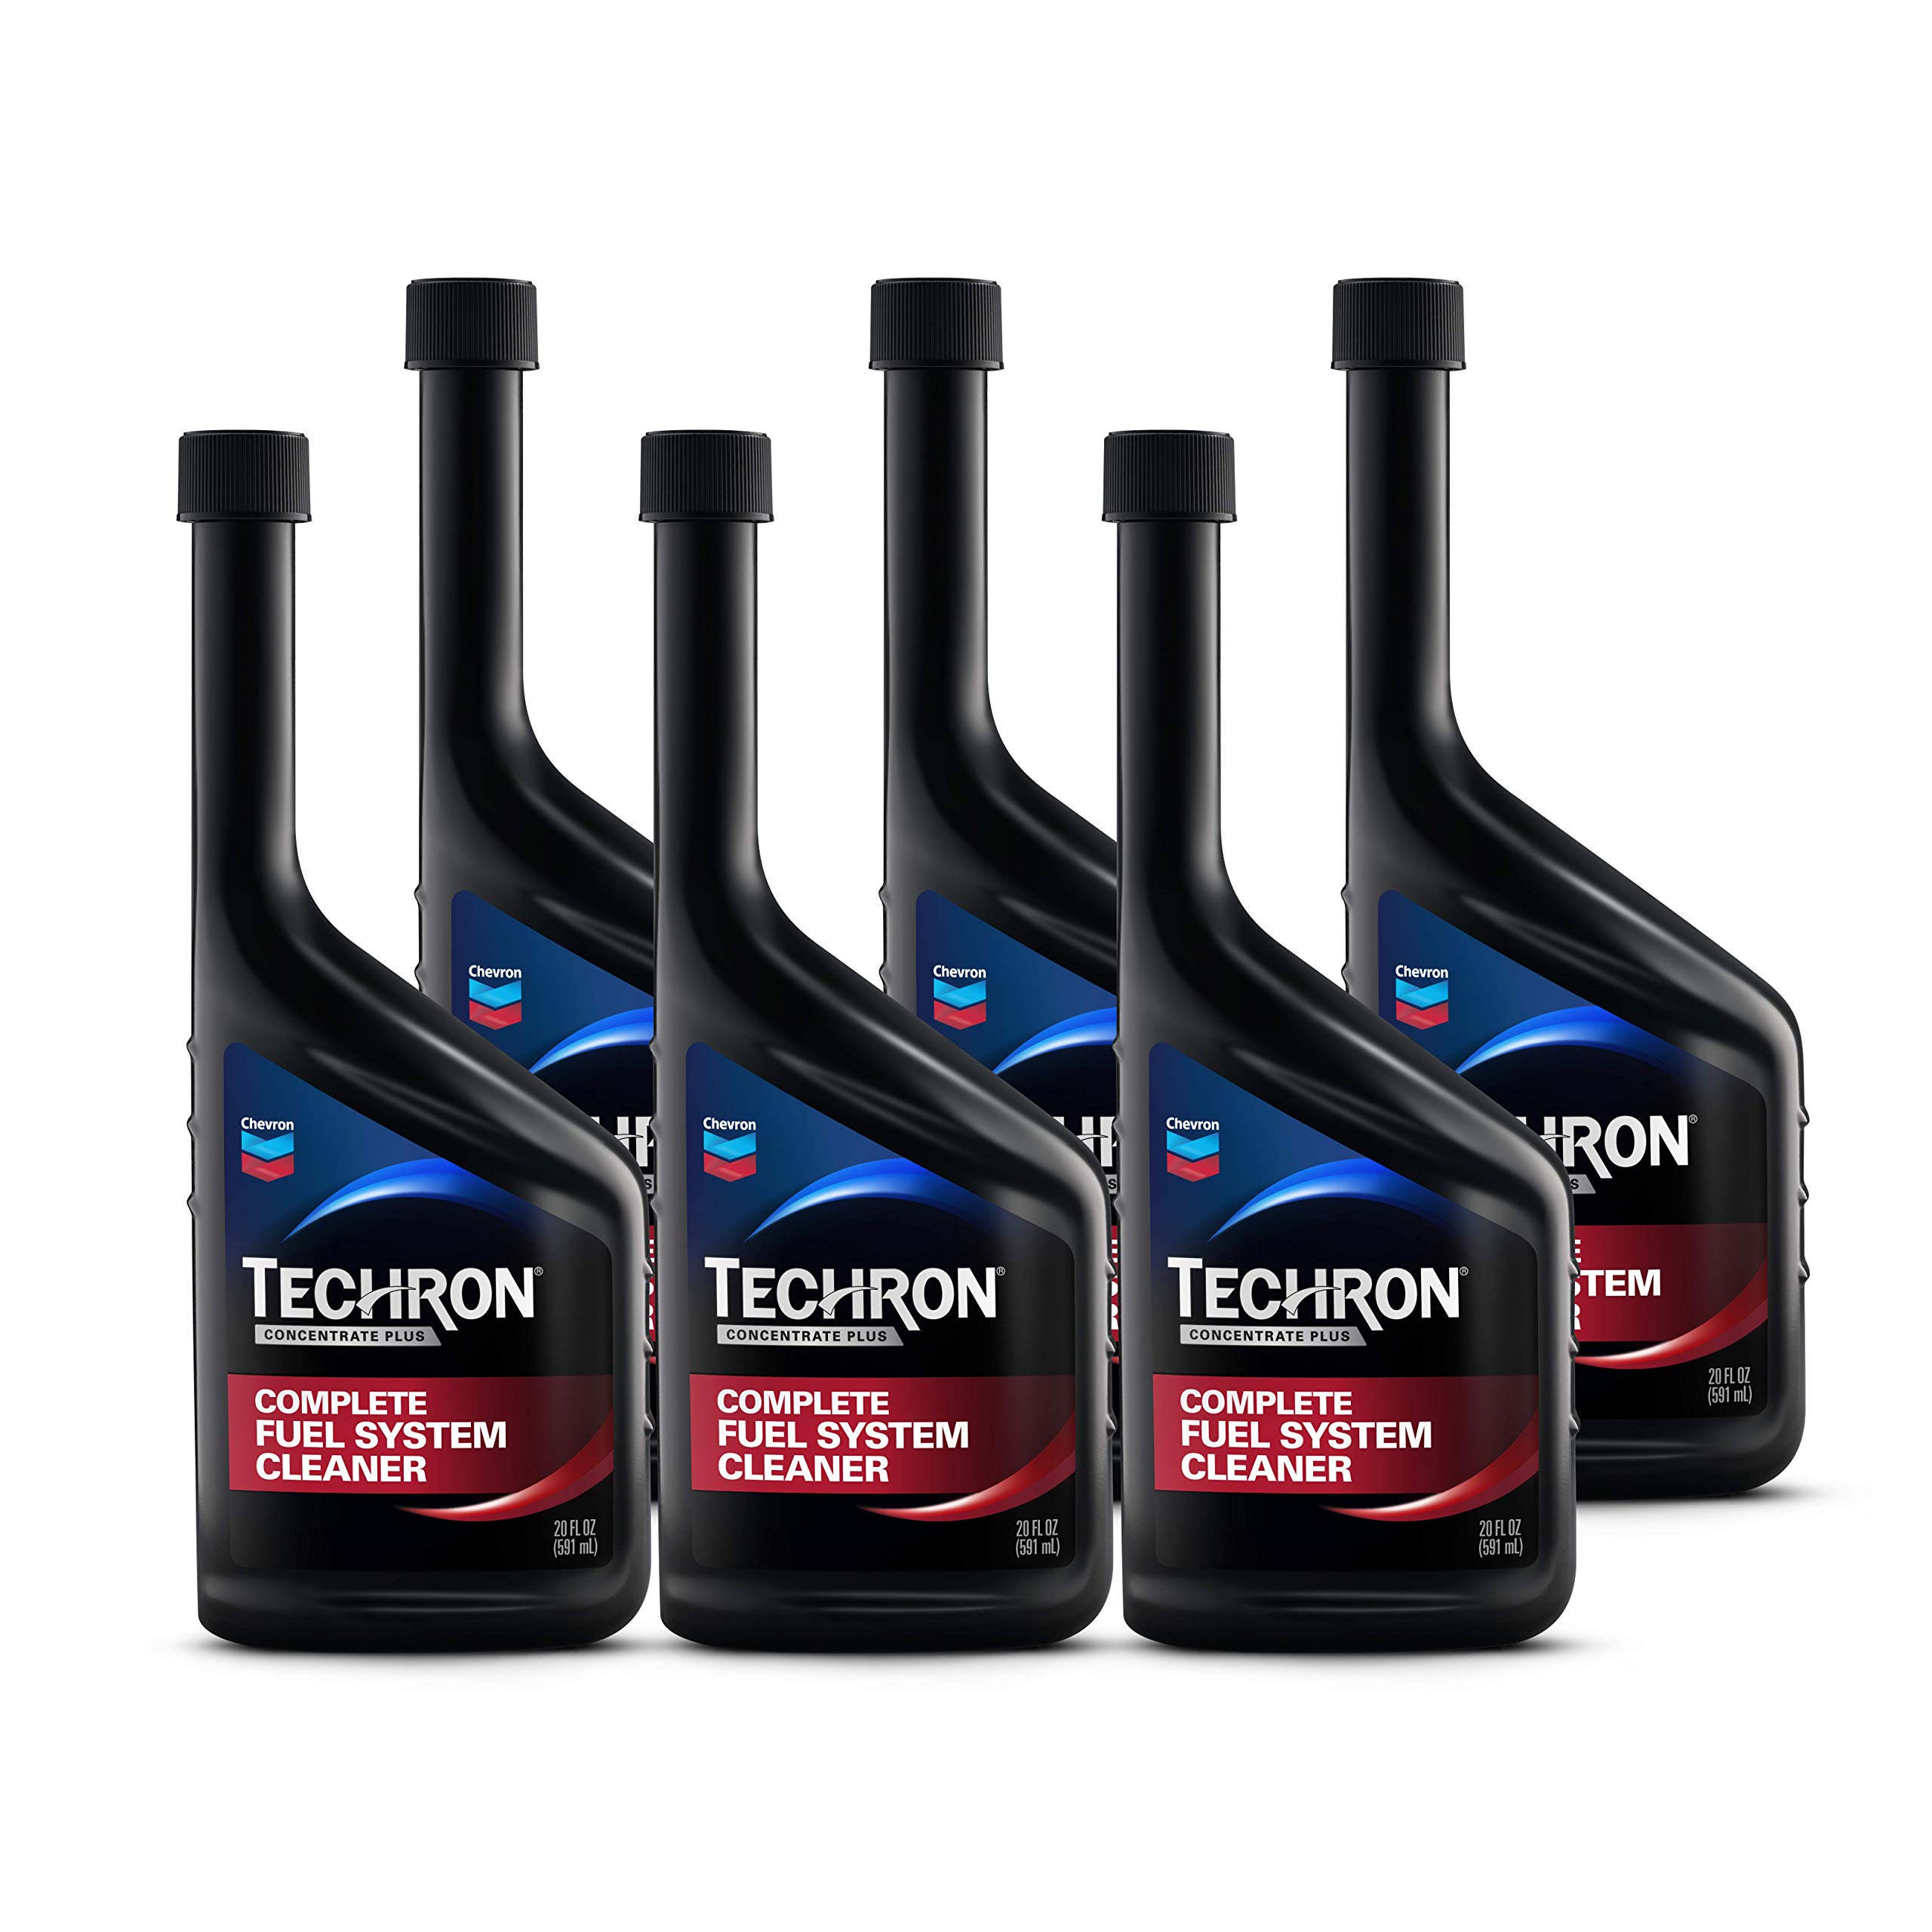 Amazon Chevron 65740-CASE Techron Concentrate Plus Fuel System Cleaner - 20 oz., Pack of 6 $55.03